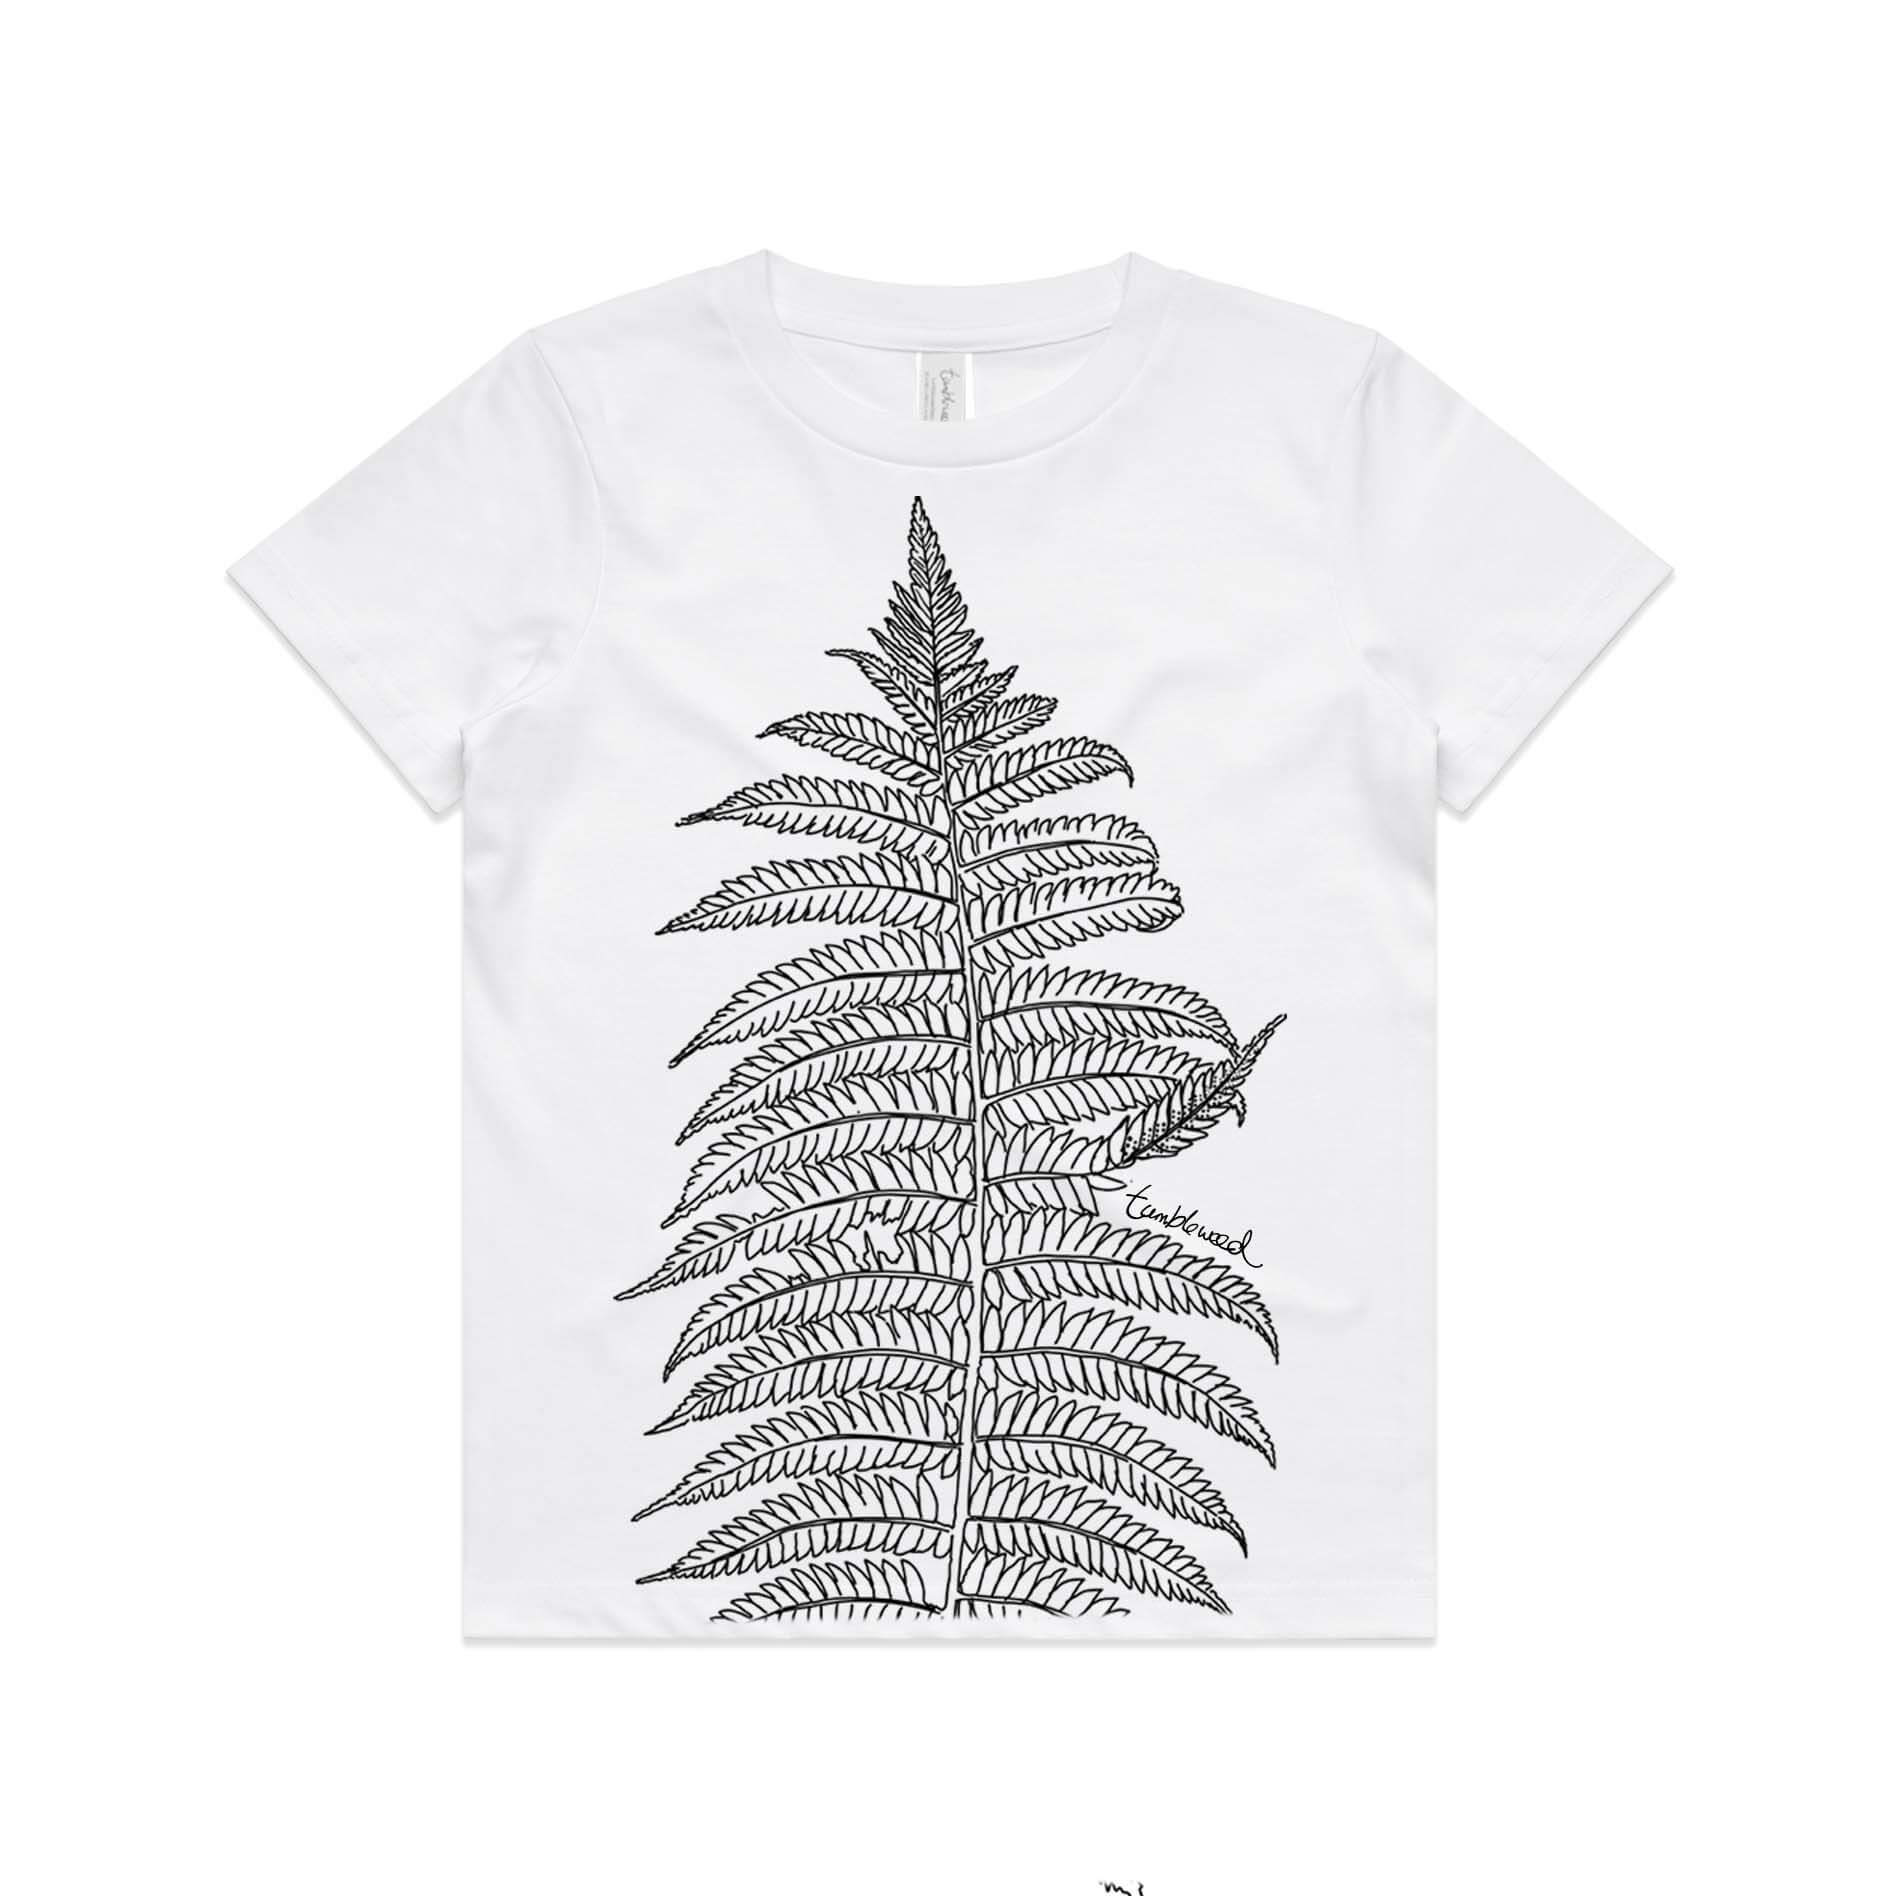 White, cotton kids' t-shirt with screen printed Silver fern/ponga design.